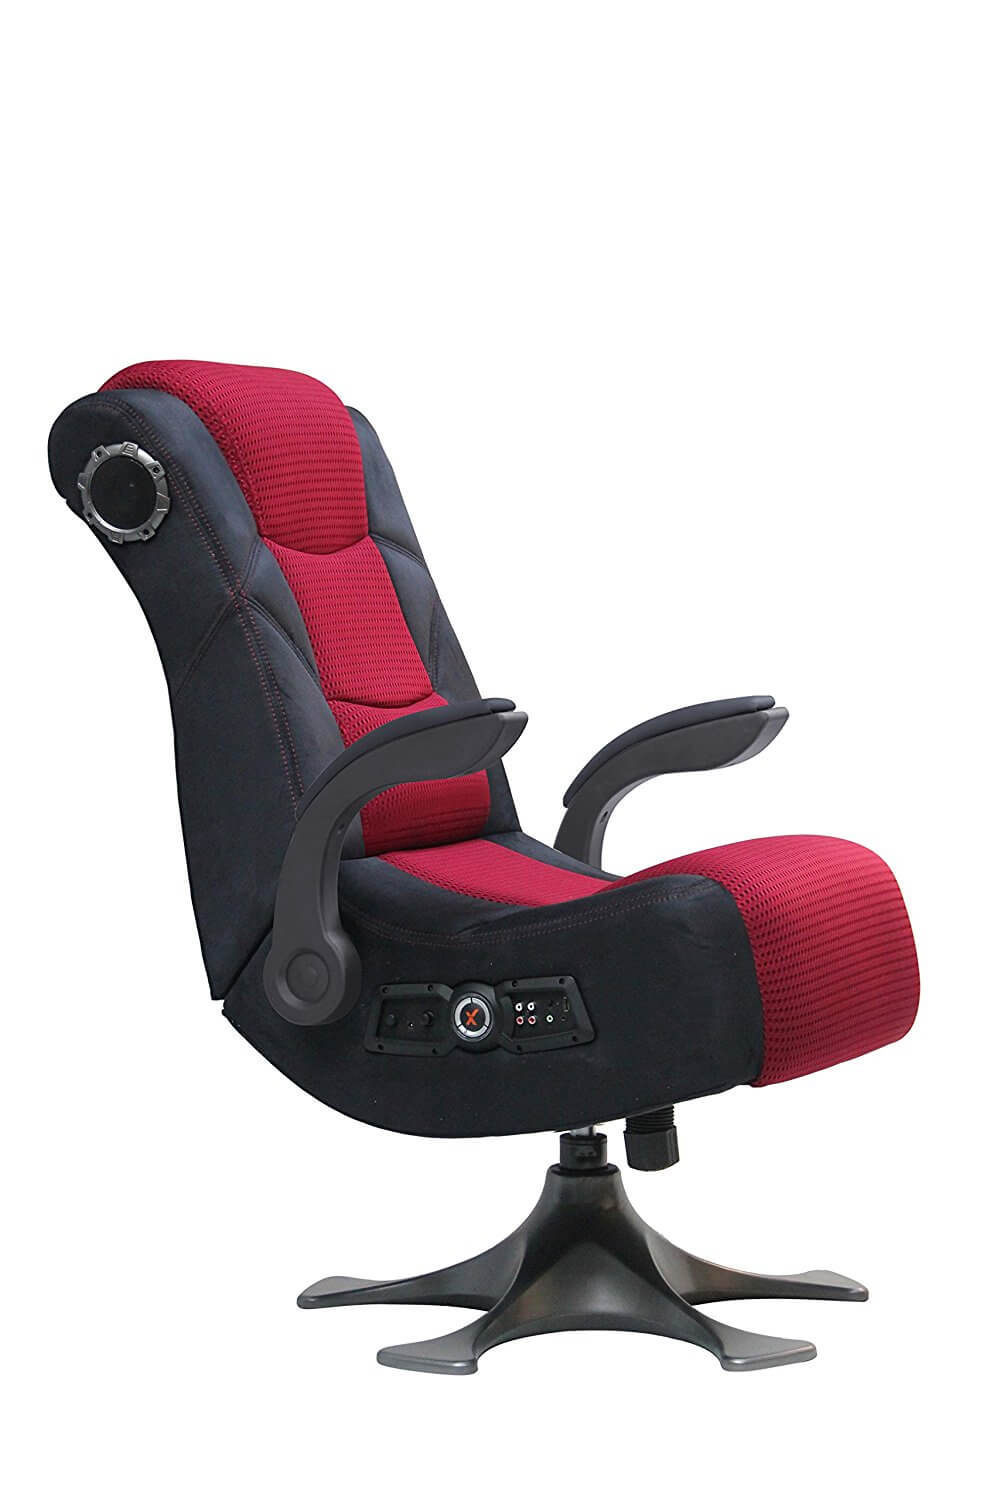 The Top 10 Gaming Chair with Speakers on Amazon